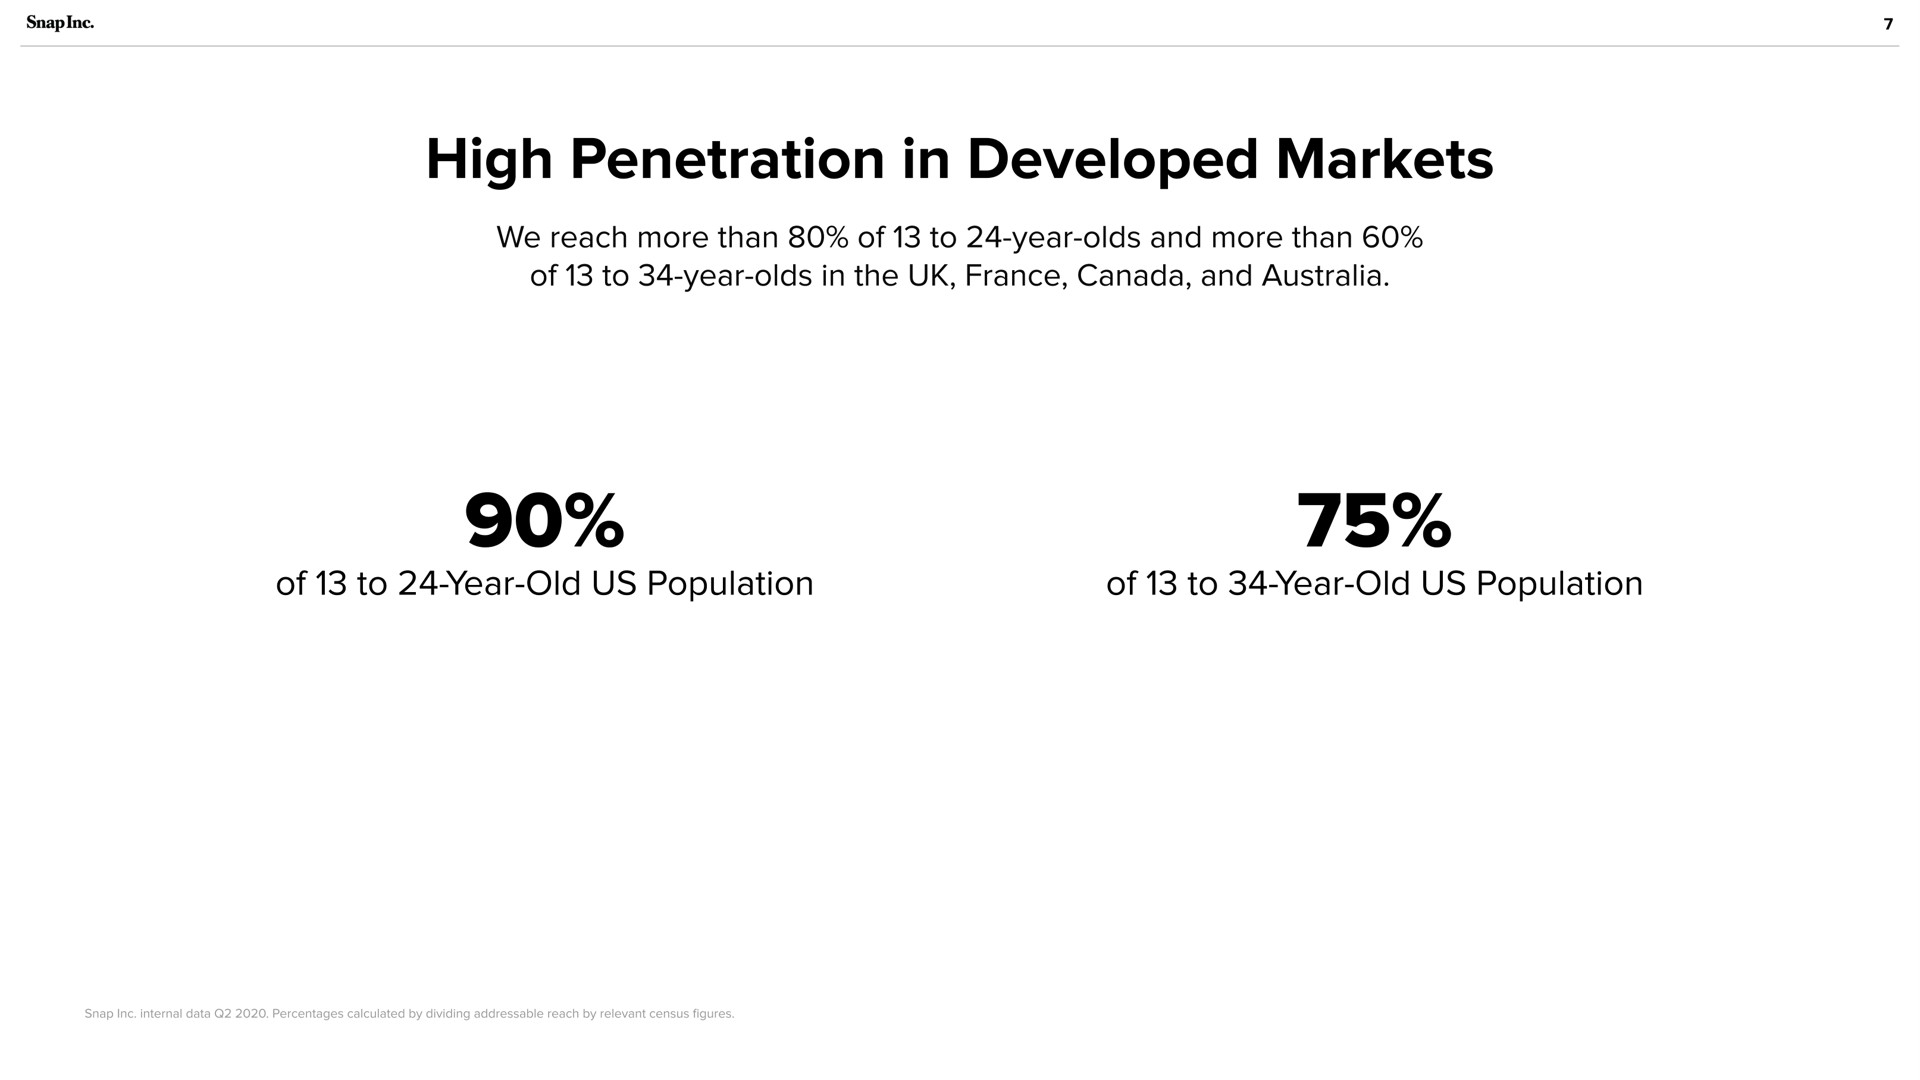 high penetration in developed markets | Snap Inc